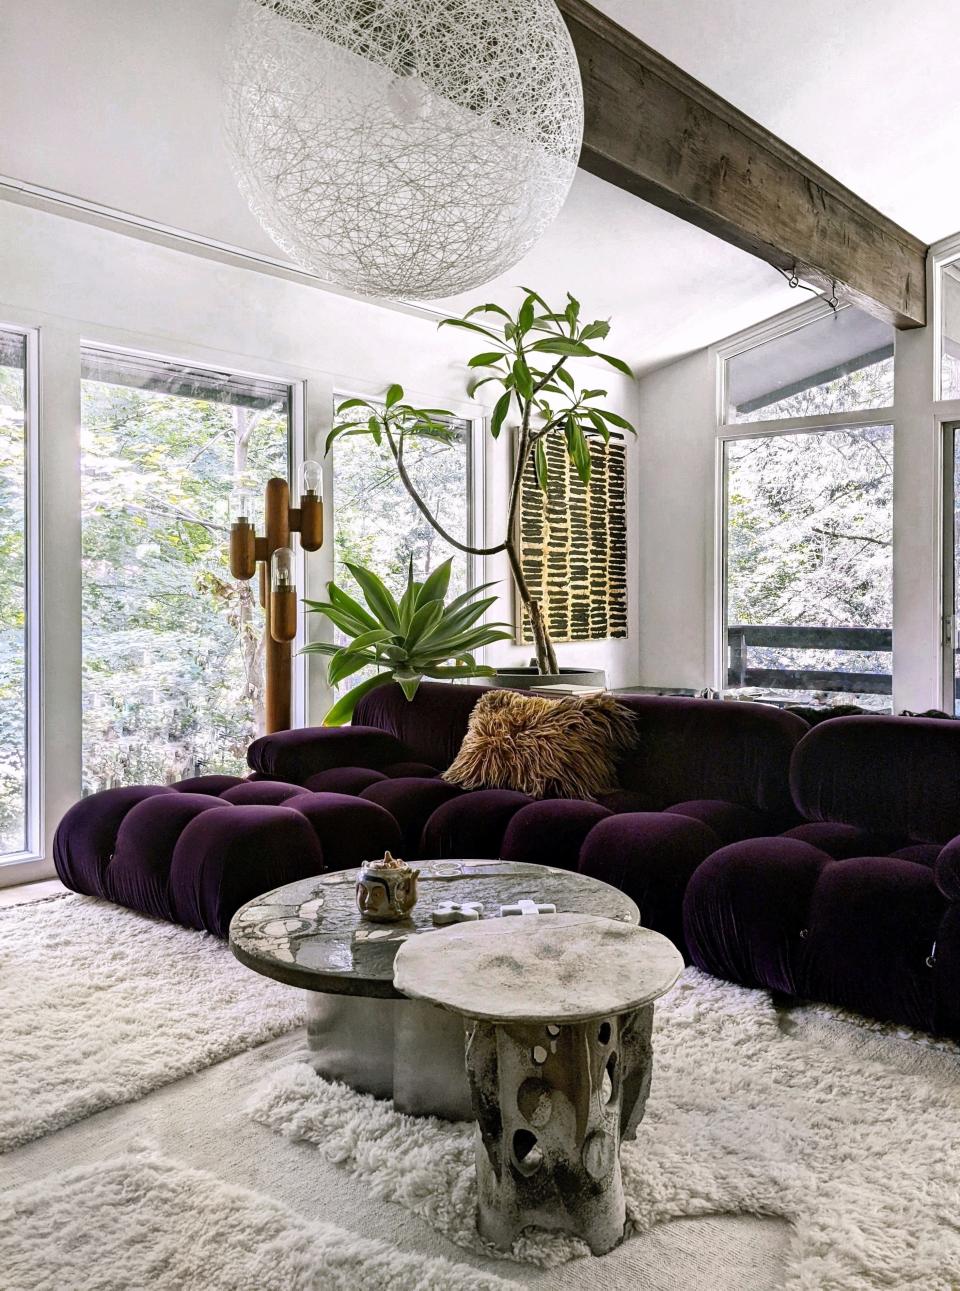 Living room with purple couch and houseplants